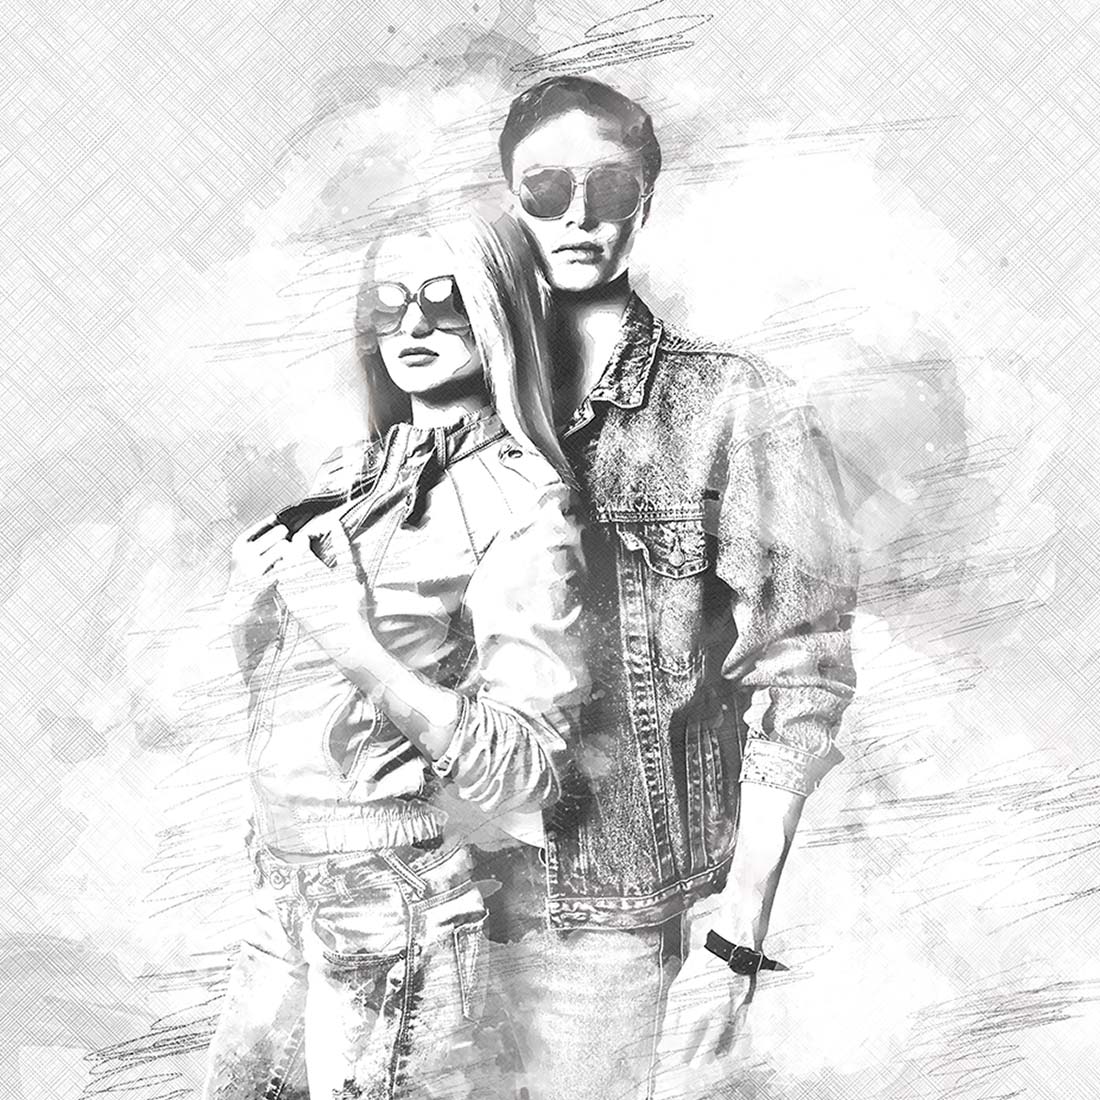 The Pair Sketch Photoshop Actio preview image.